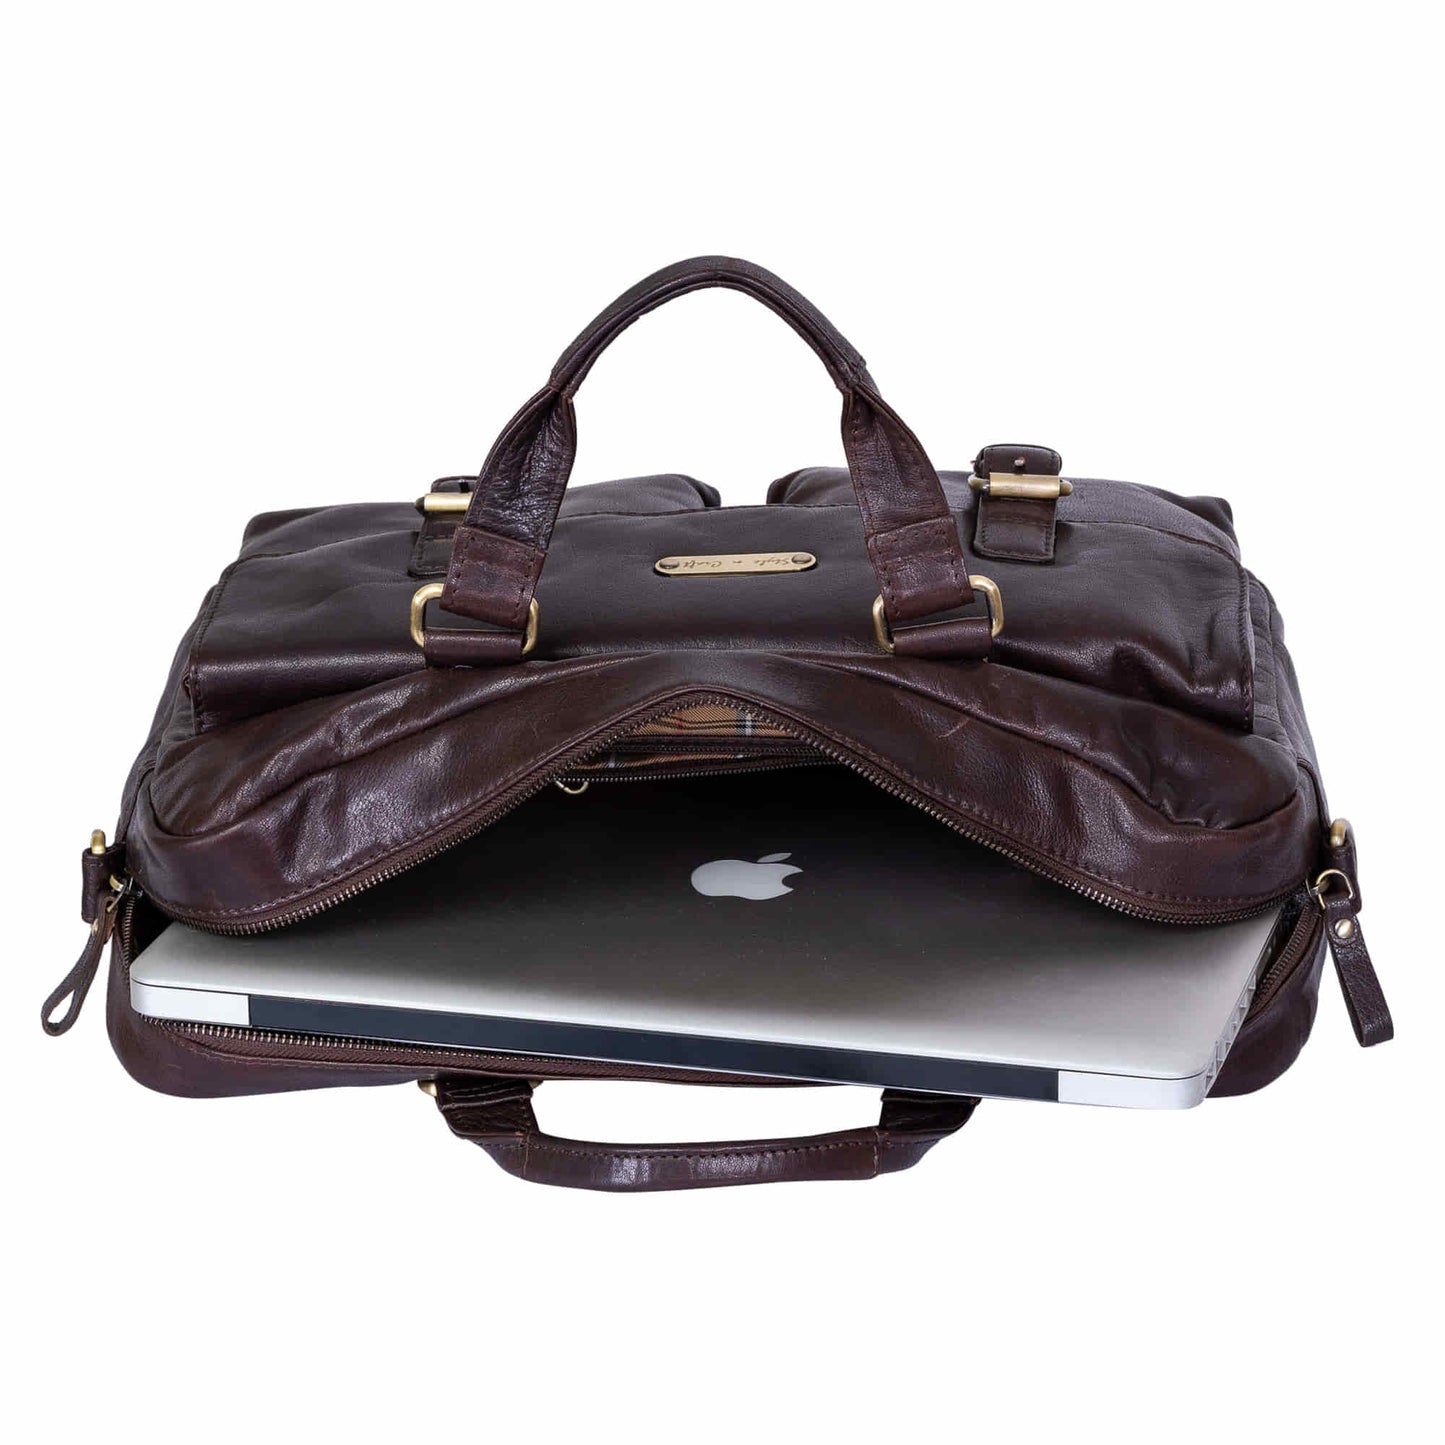 Style n Craft 392500 Cross Body Messenger Bag in Full Grain Dark Brown Vintage Leather - Top opening of the bag showing the use of the bag by putting in a 15 inch laptop showing